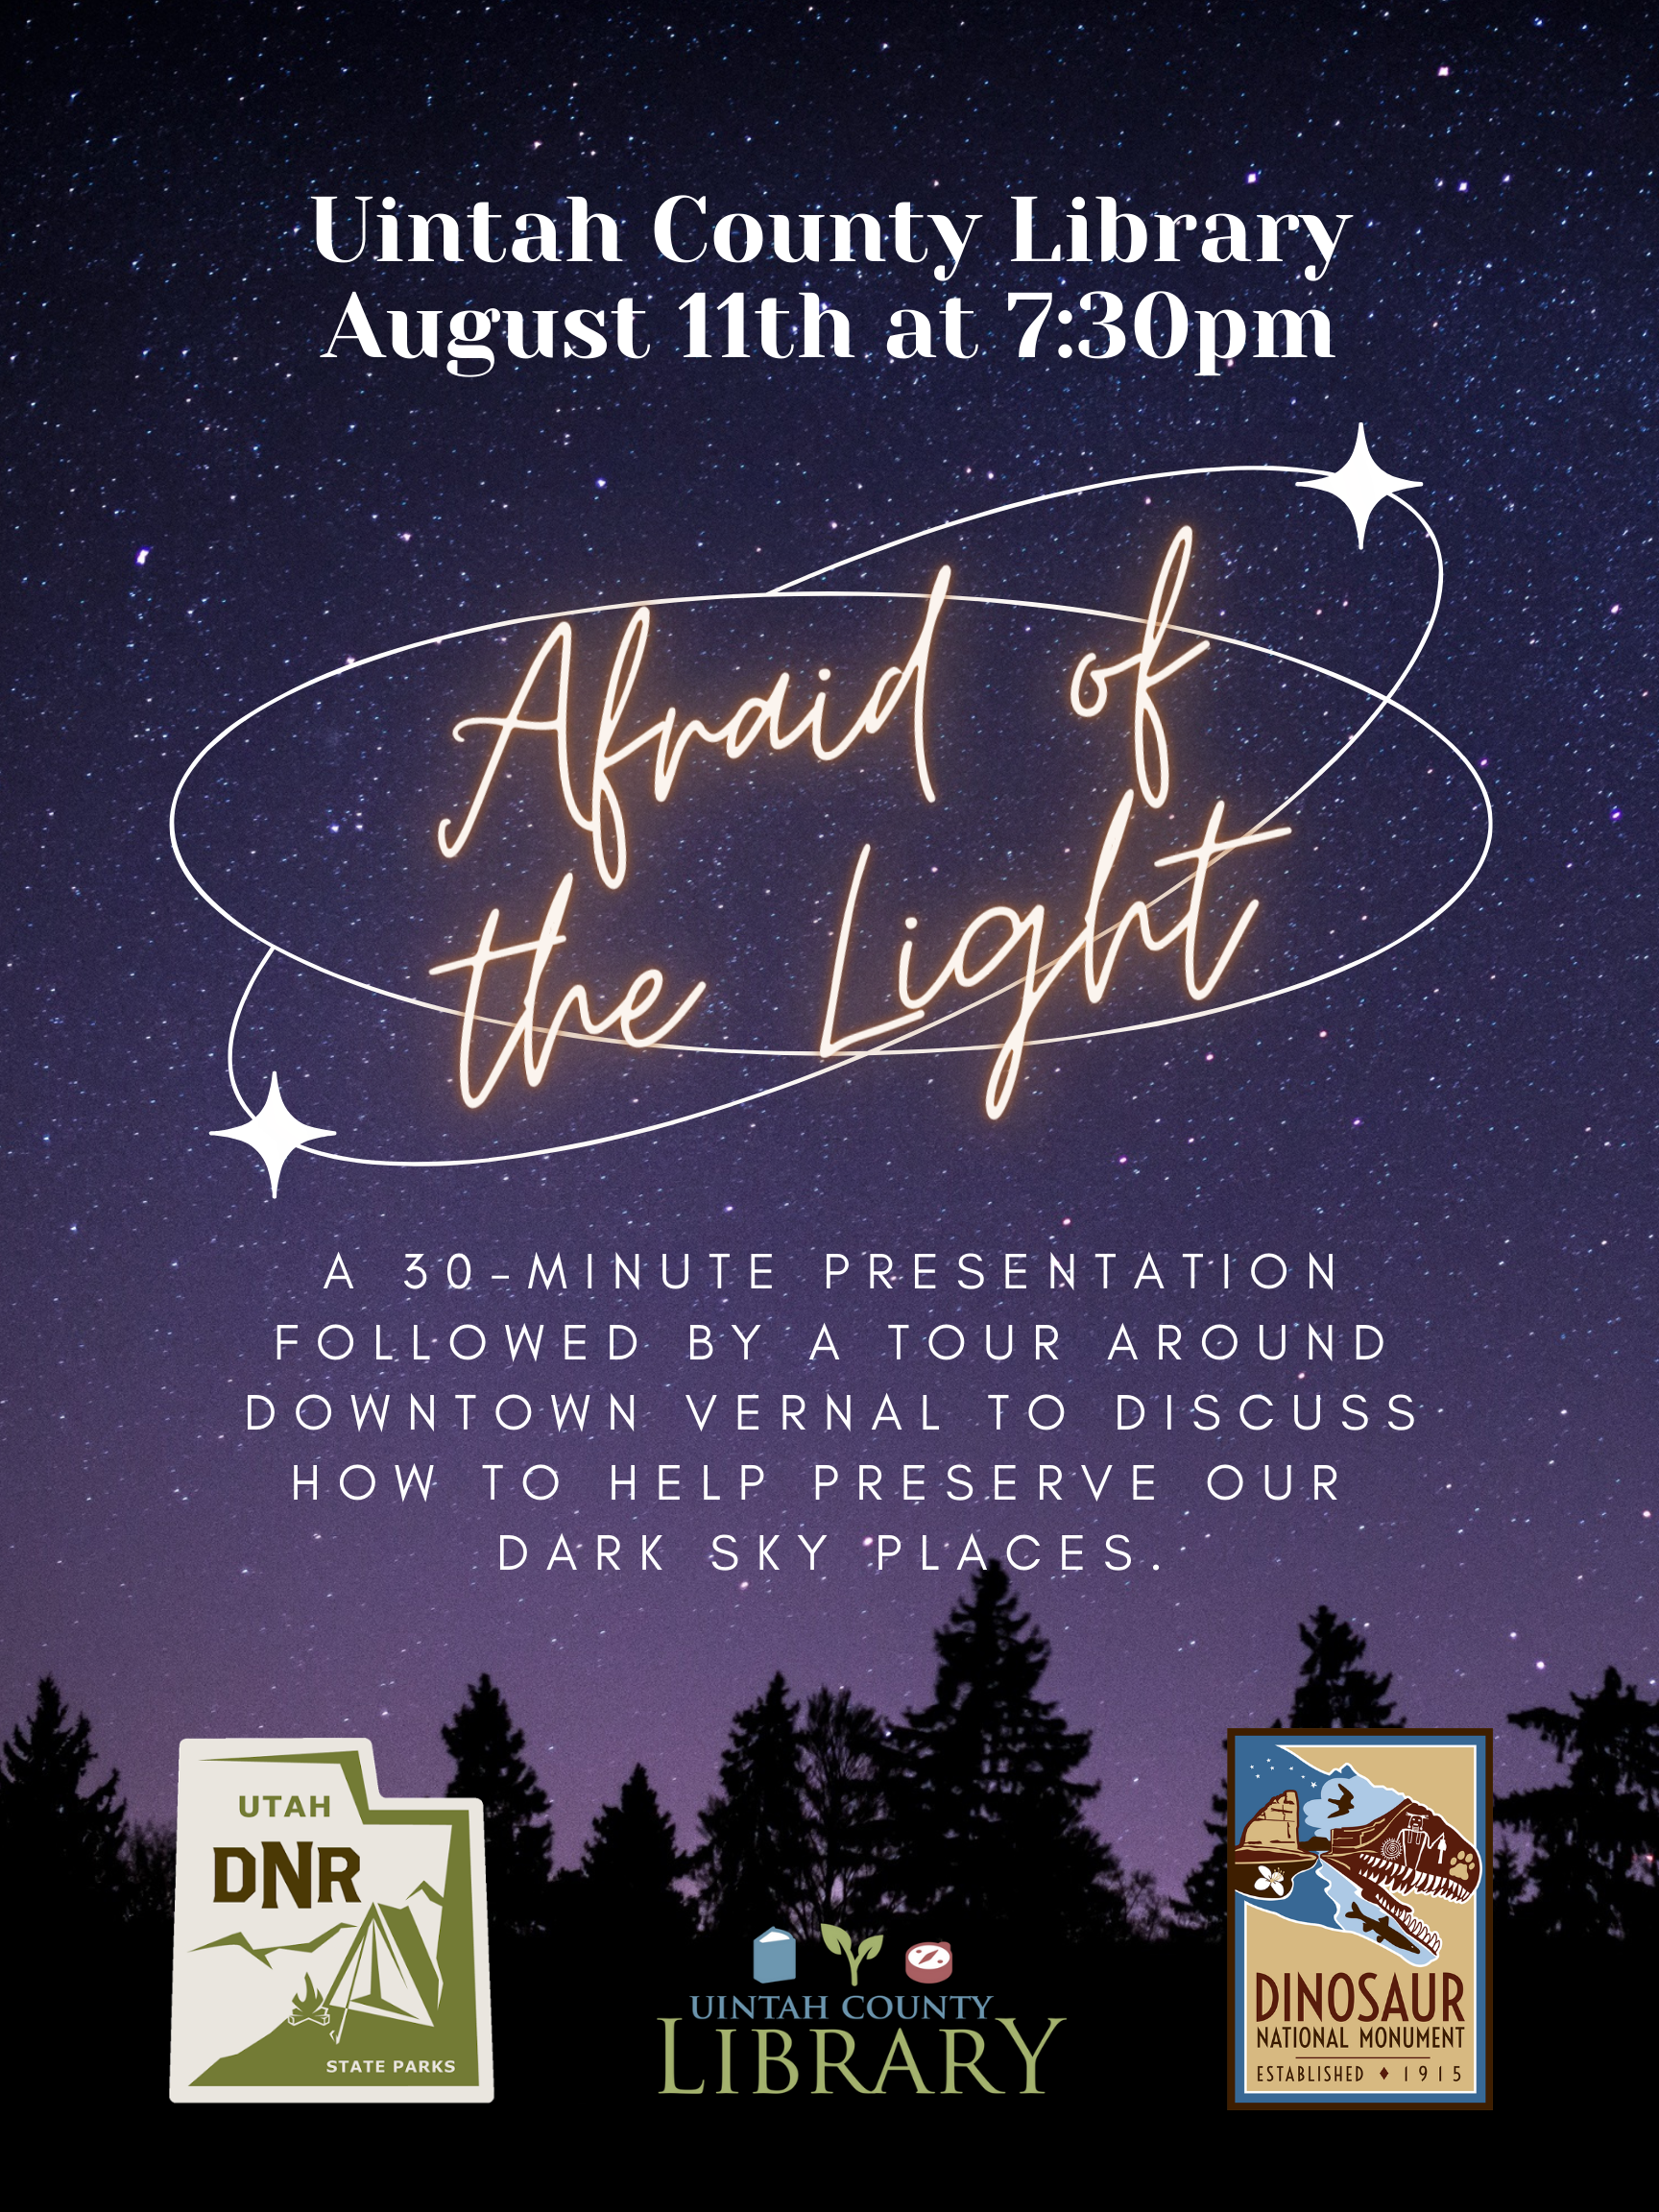 Starry sky background with tree silhouettes and text in the foreground | "Uintah County Library | August 11th at 7:30pm | Afraid of the Light | A 30-minute presentation followed by a tour around downtown Vernal to discuss how to help preserve our dark sky places." | Utah DNR State Parks logo, Uintah County Library logo, and Dinosaur National Monument logo